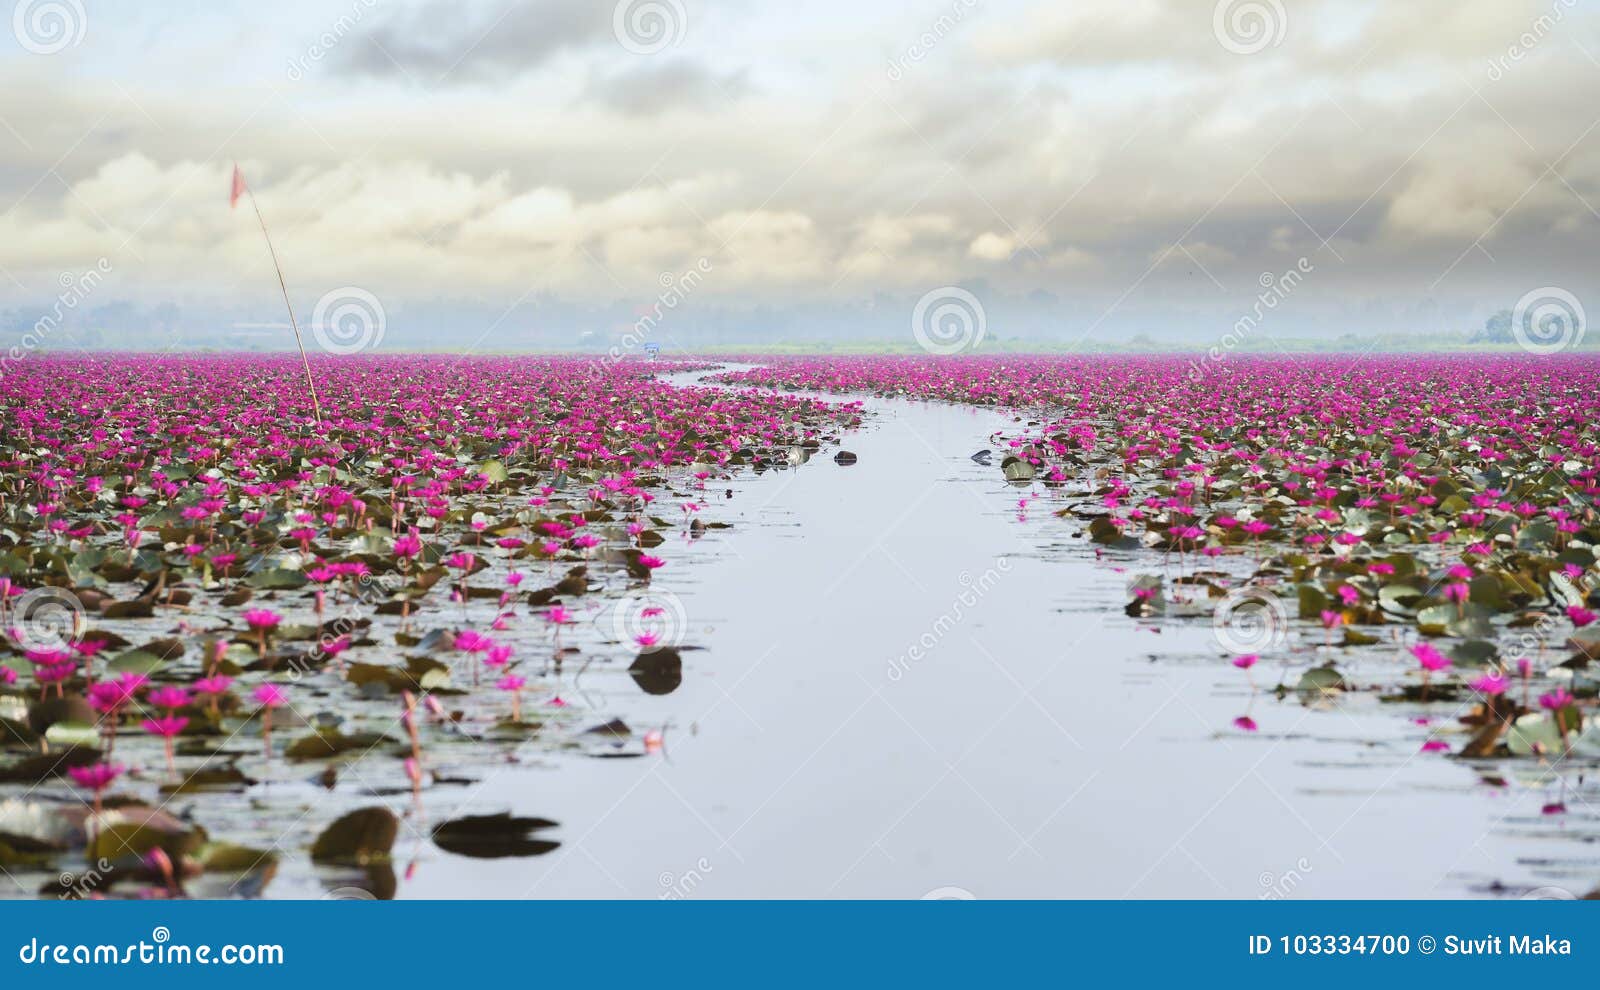 Beautiful Lotus Flower Field at the Red Lotus Stock Photo - Image of flower, park: 103334700